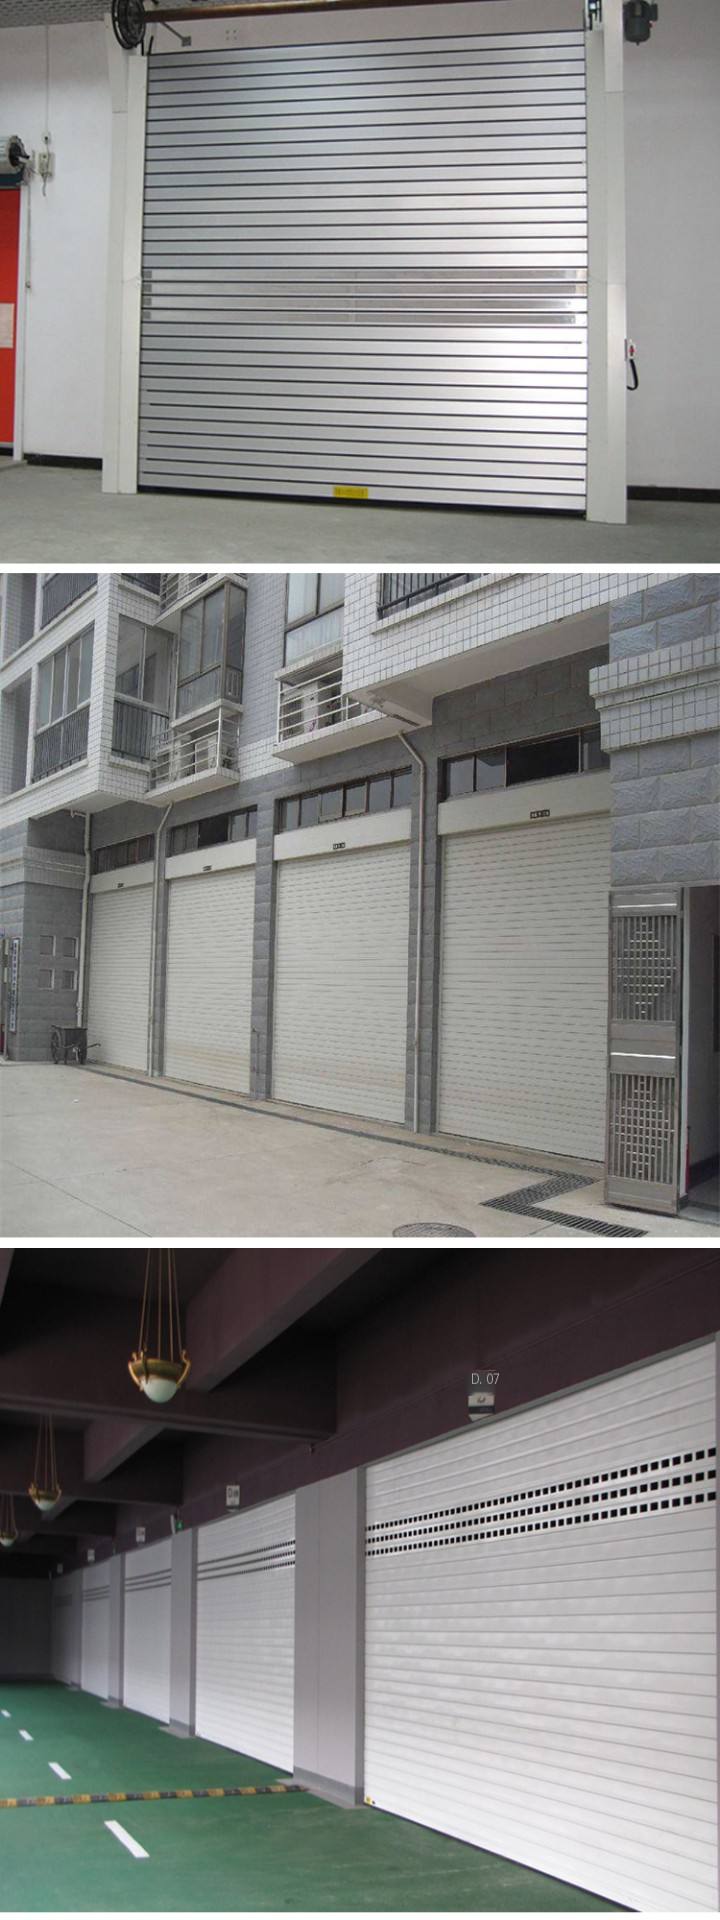 Zhongyi warehouse aluminum profile rolling gate runs smoothly, is sturdy, durable, and has multiple dimensions